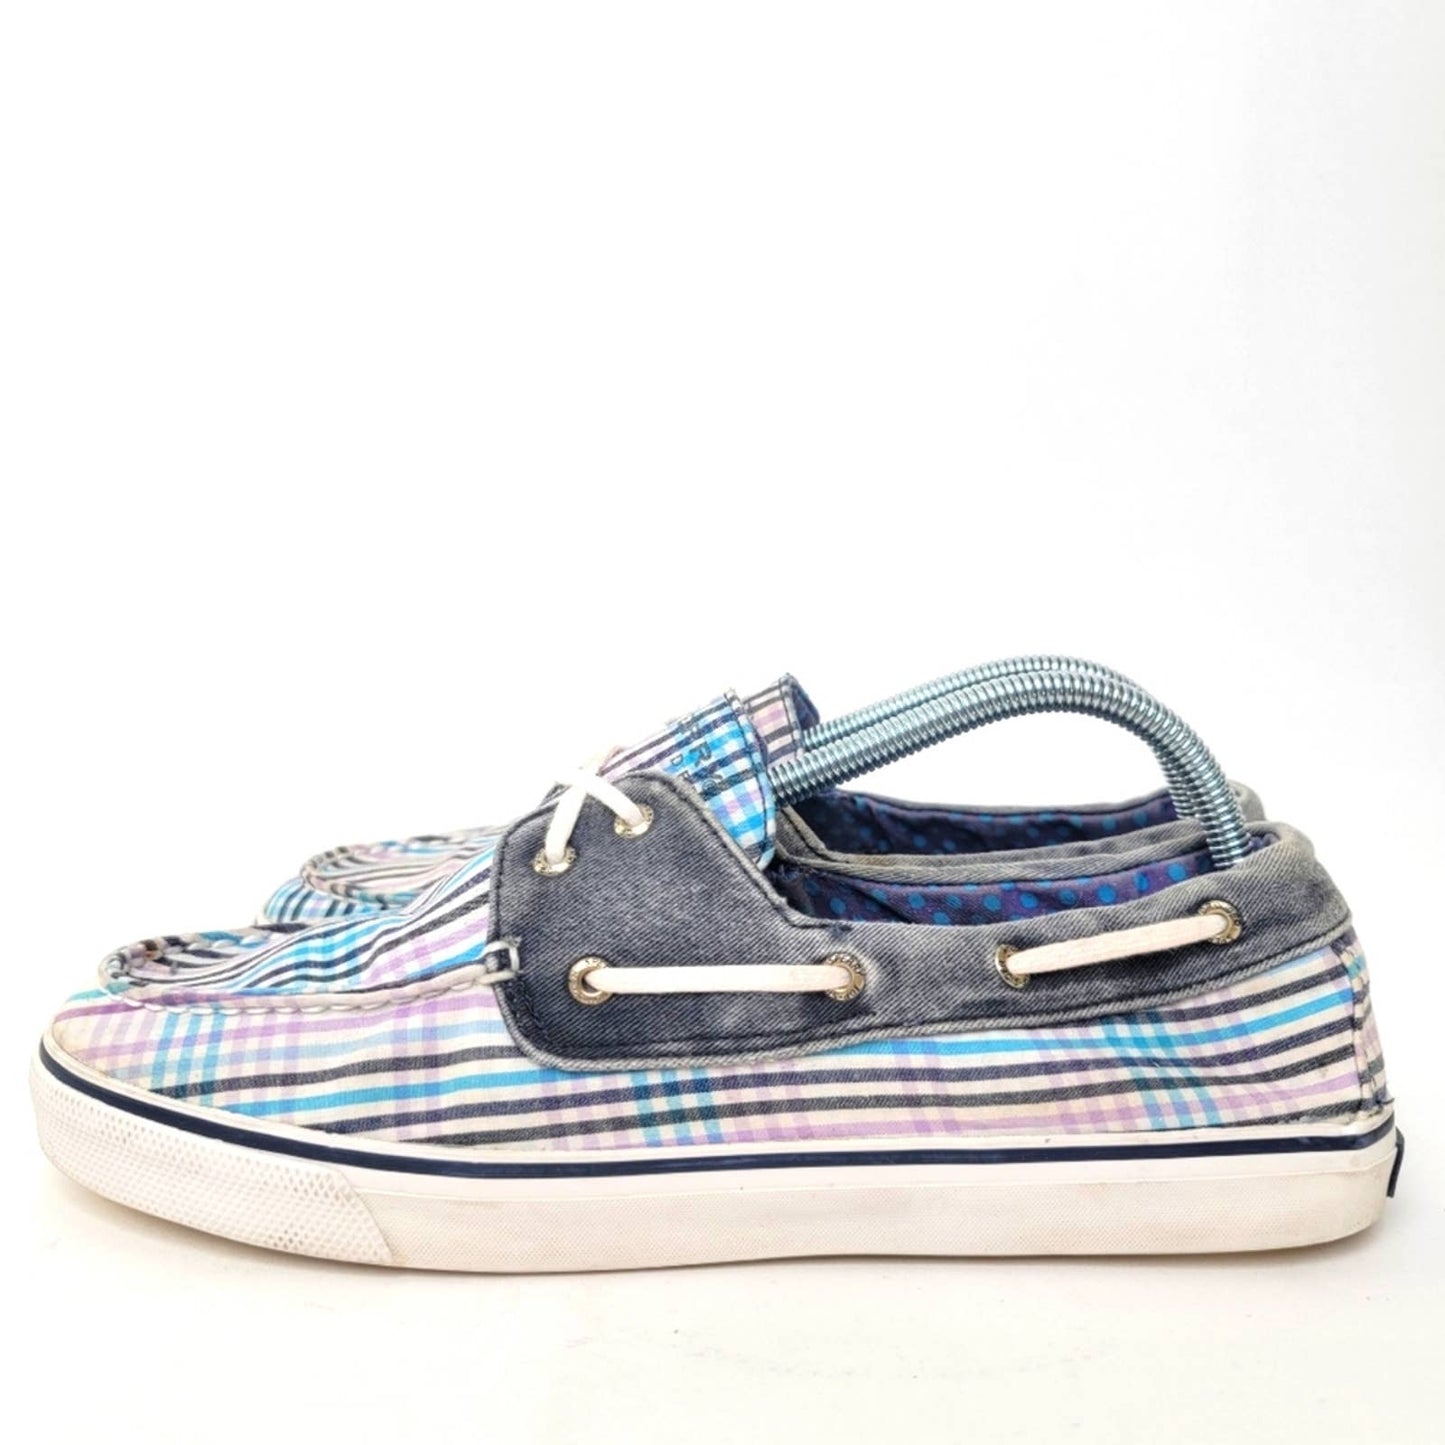 Sperry Top Sider Pastel Plaid Boat Shoes - 11